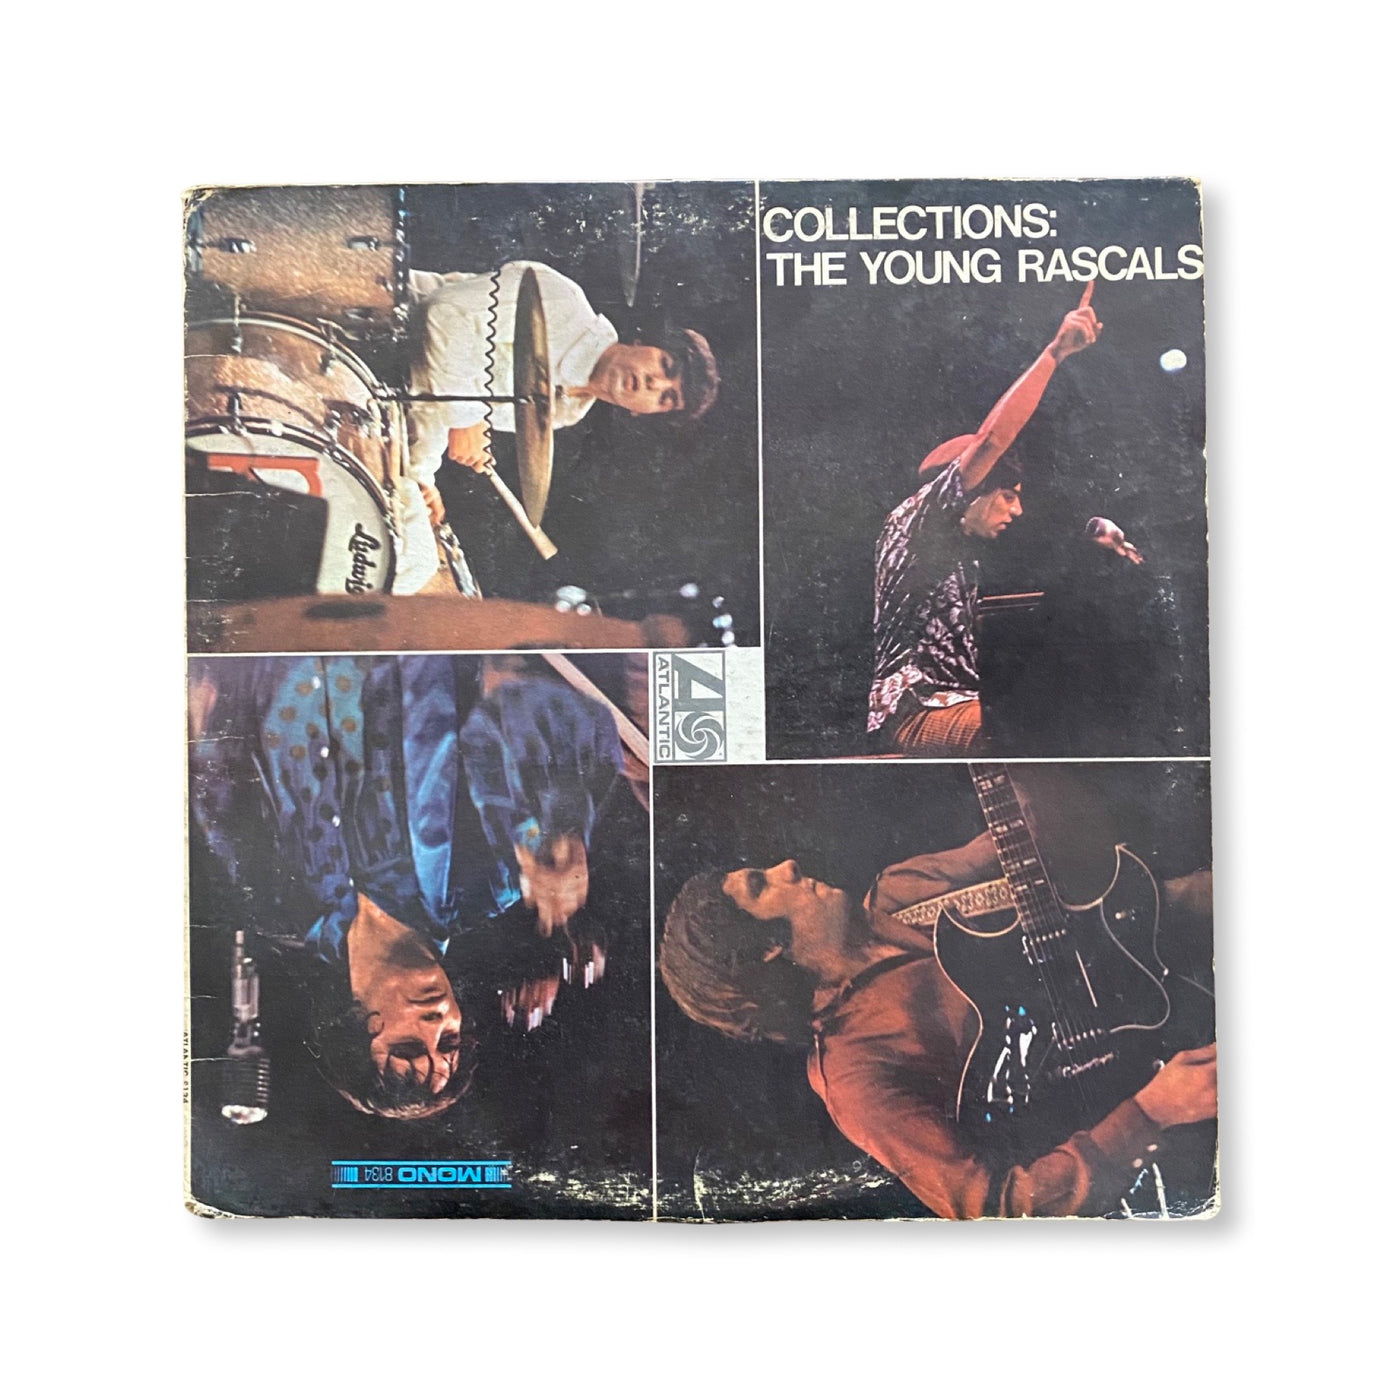 The Young Rascals - Collections